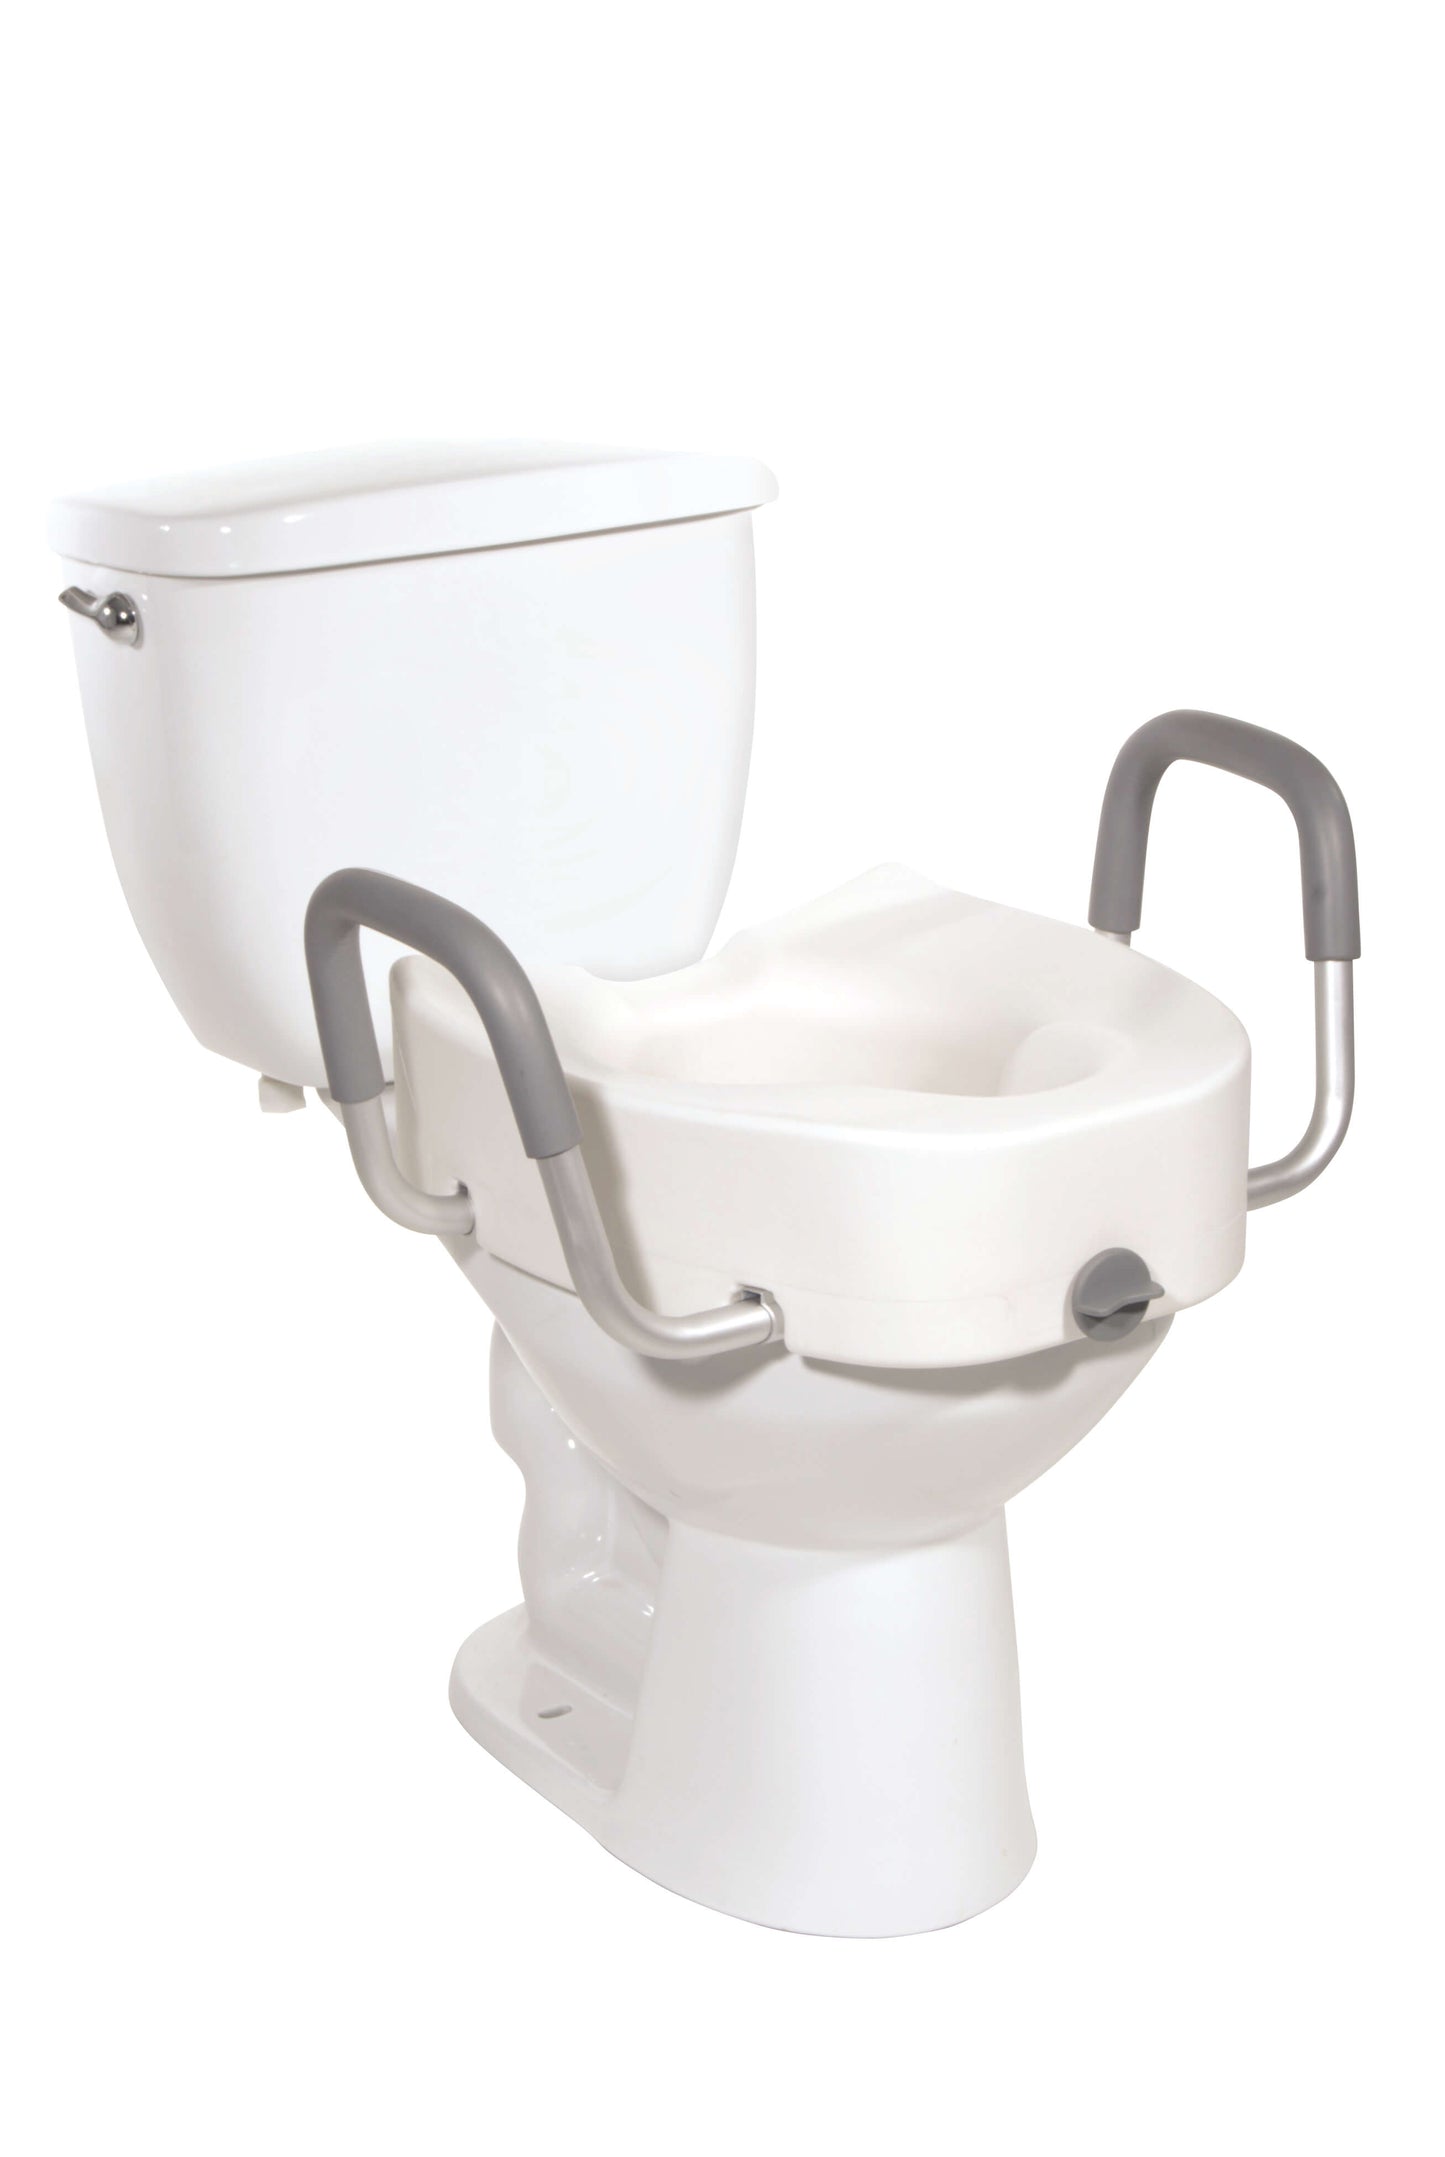 Premium Plastic, Raised, Elongated Toilet Seat with Lock and Arms